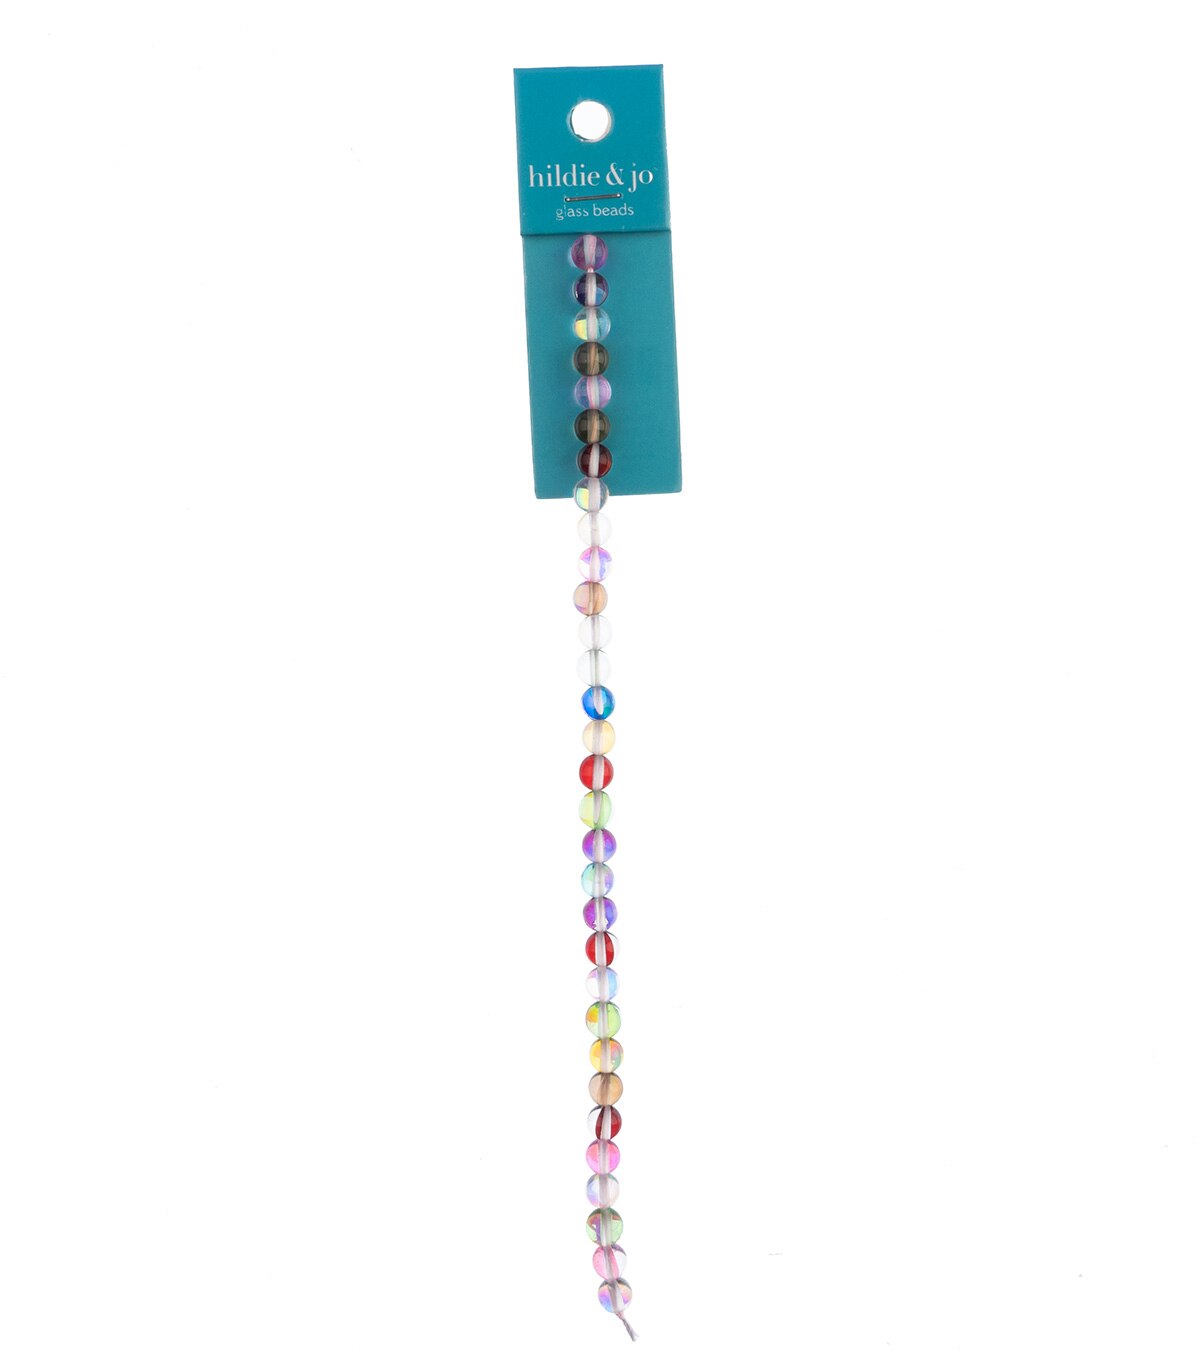 hildie & jo Strung Beads Crystal Moon Stone Mixed Color | JOANN